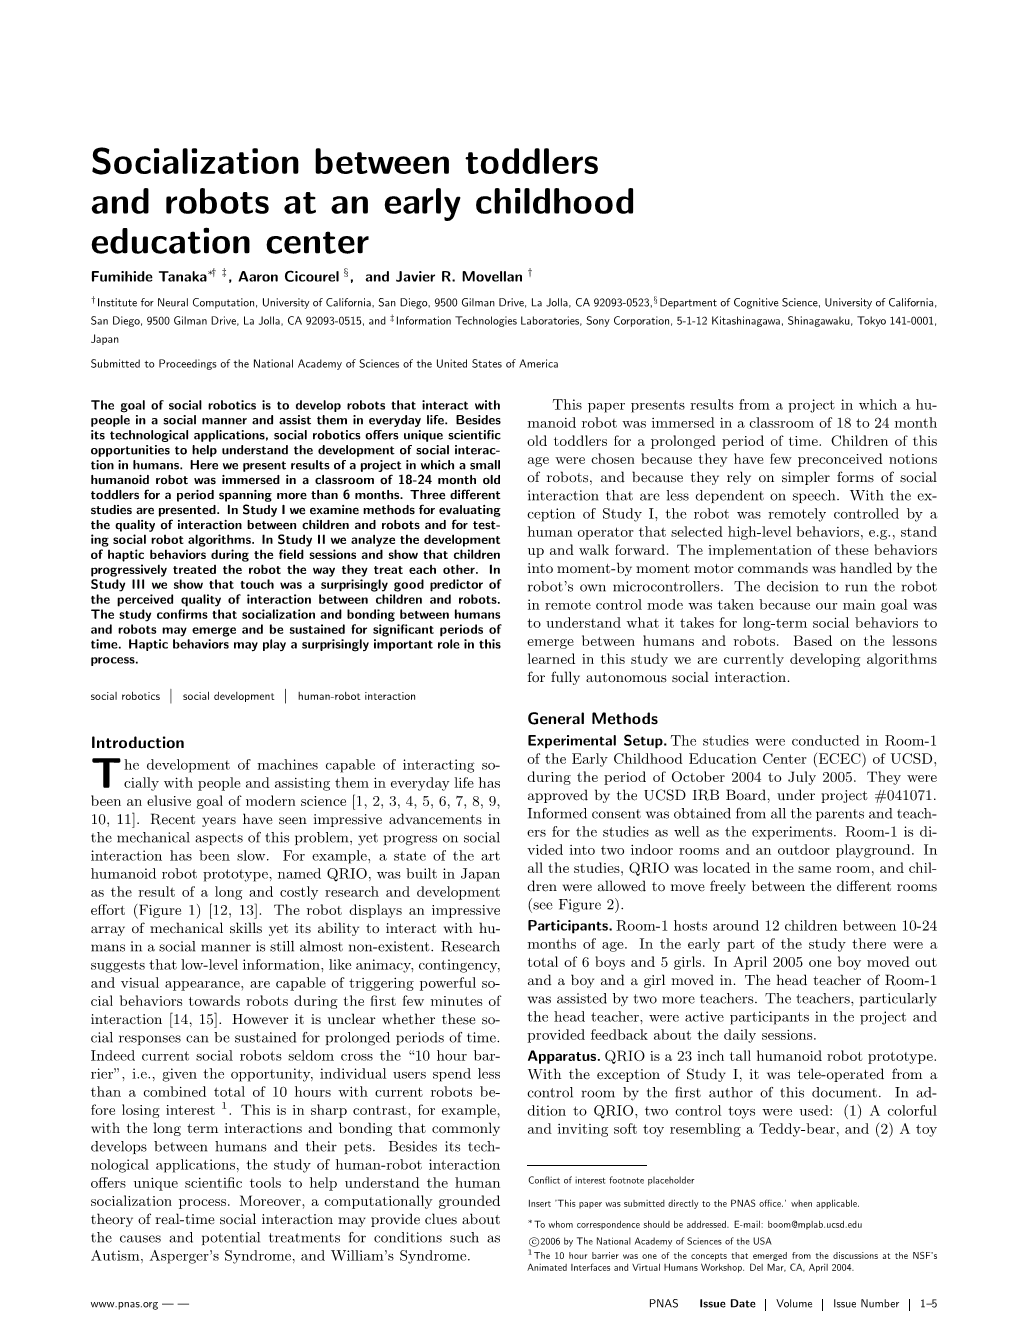 Socialization Between Toddlers and Robots at an Early Childhood Education Center